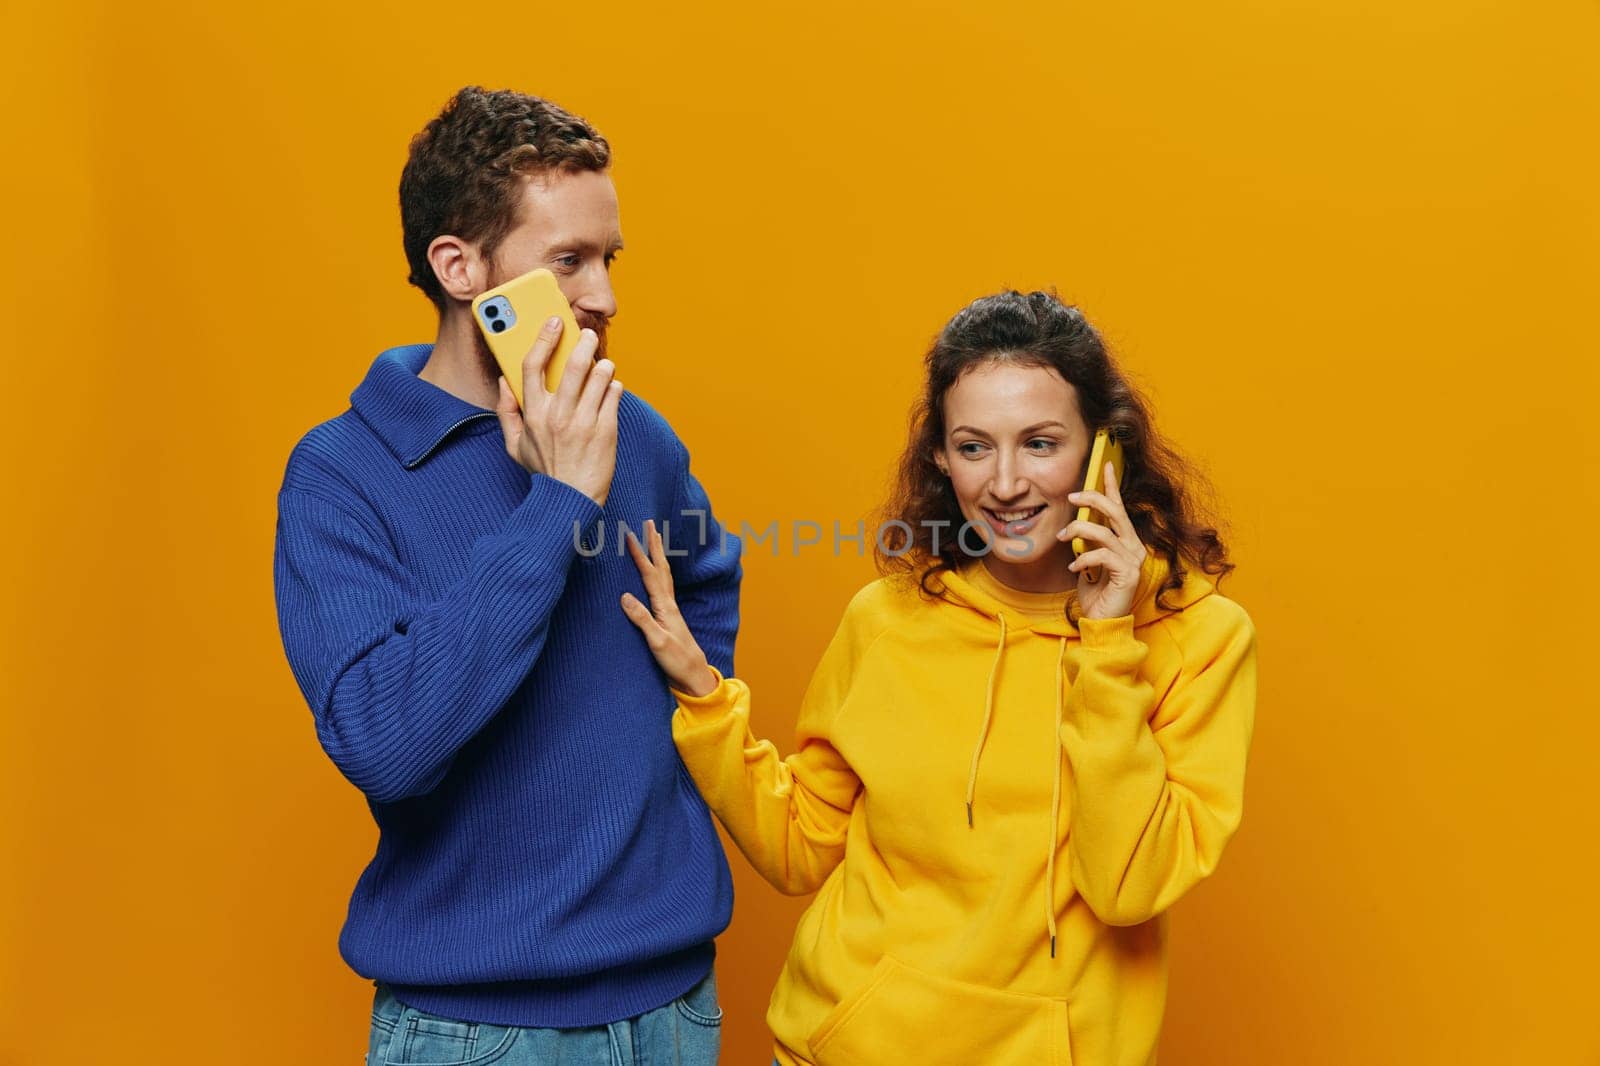 Woman and man cheerful couple with phones in hand talking on cell phone crooked smile cheerful, on yellow background. The concept of real family relationships, talking on the phone, work online. High quality photo